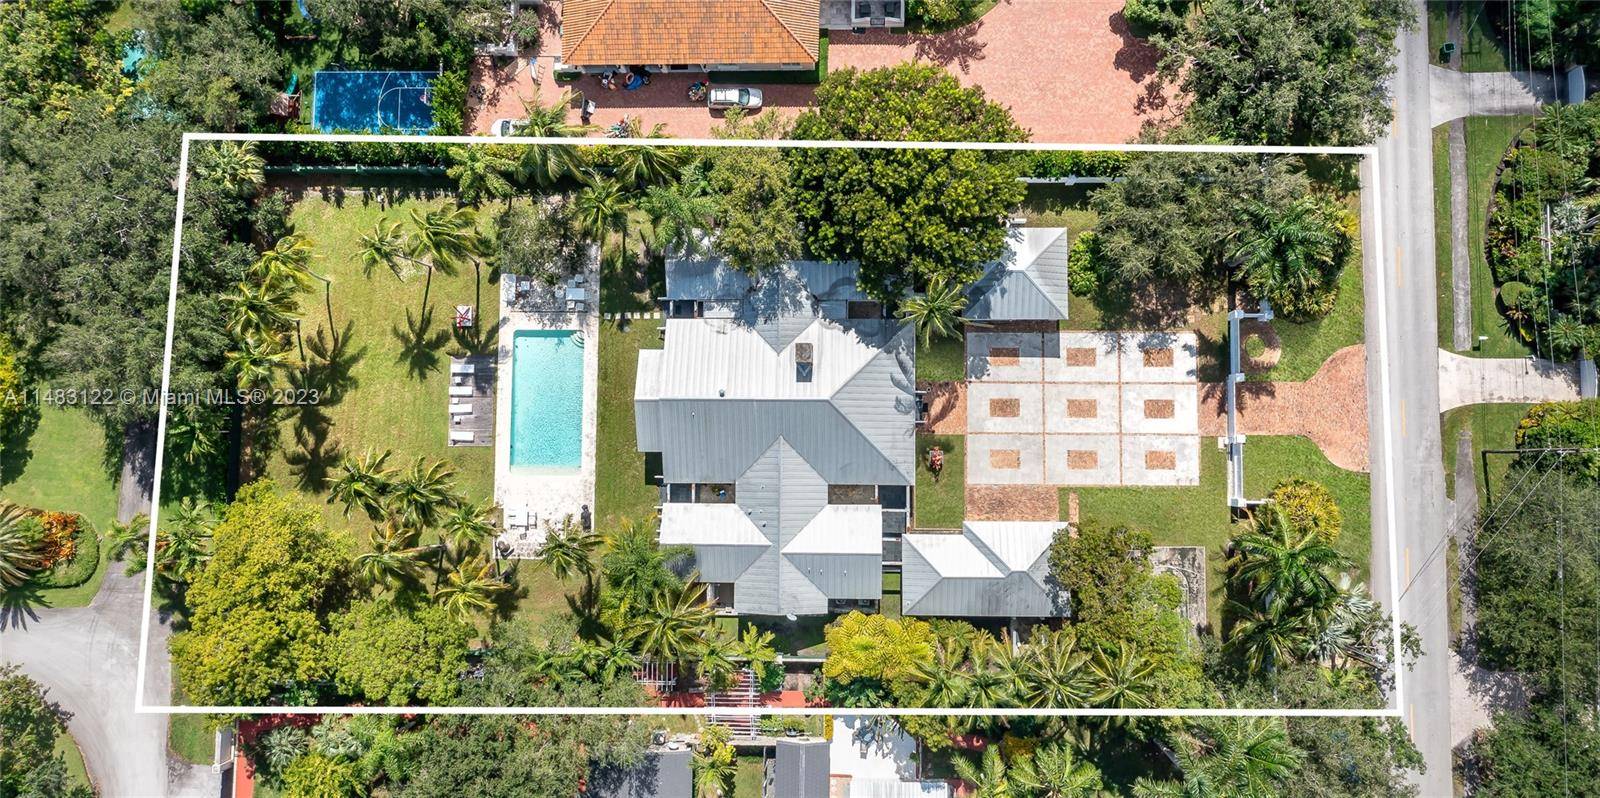 ONE ACRE 43, 560 SF street to street lot, situated in the desirable CORAL GABLES neighborhood.